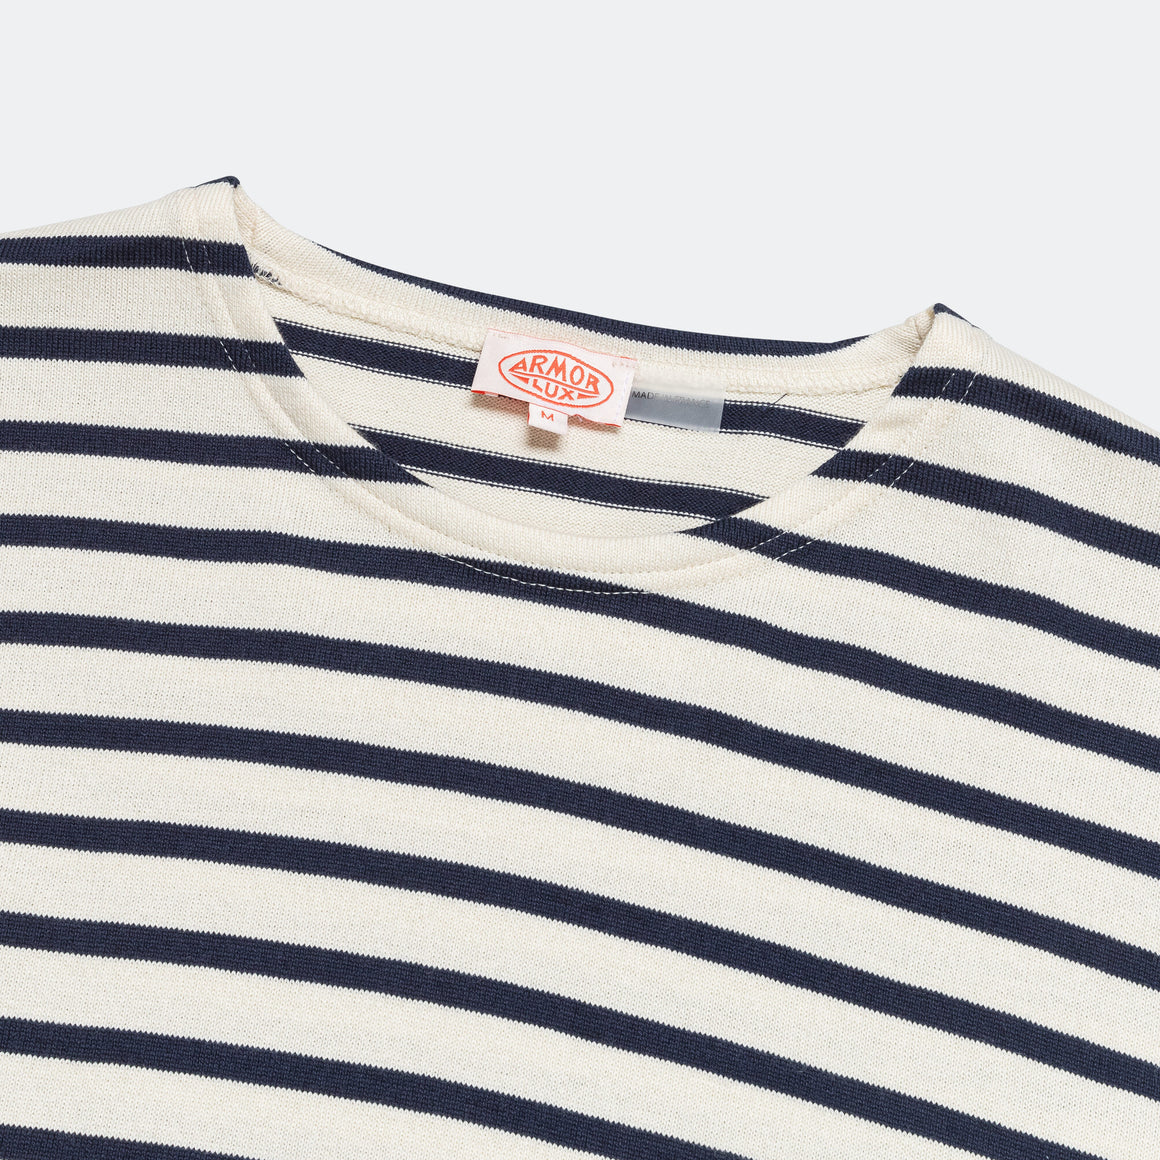 Armor Lux - Heritage 'Mariniere' LS Shirt - Nature/Marine Deep Navy - UP THERE